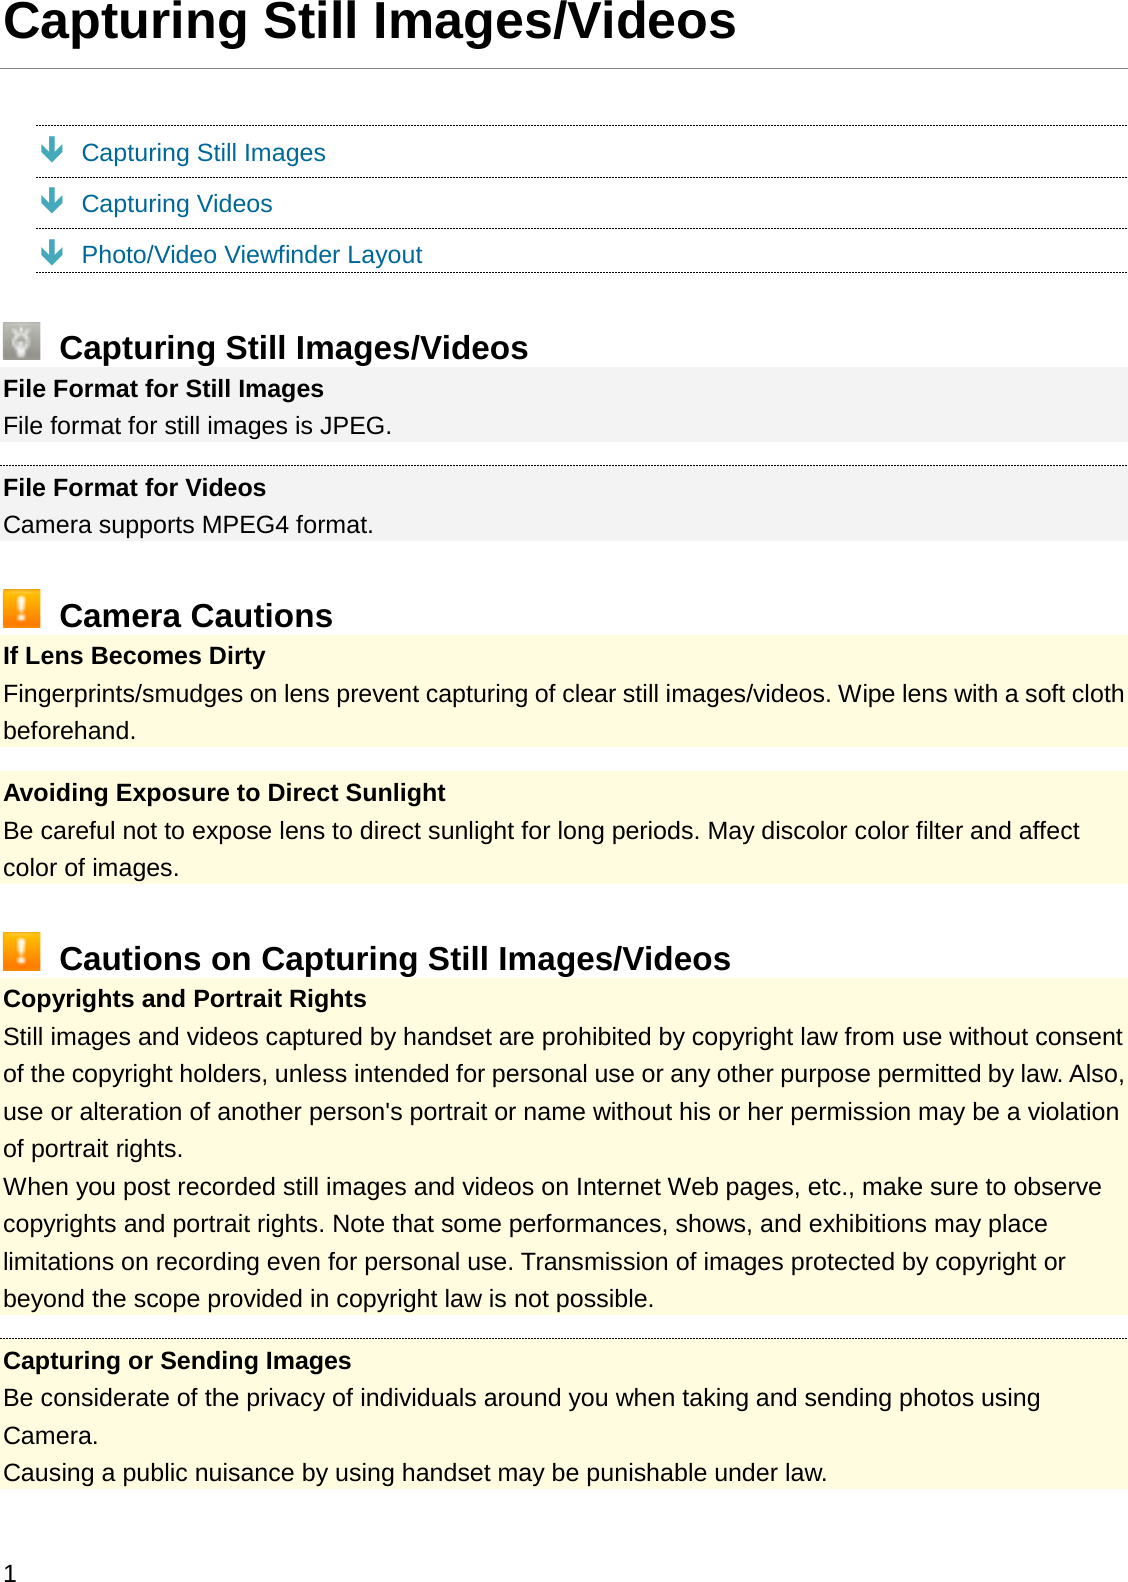 Capturing Still Images/VideosÐCapturing Still ImagesÐCapturing VideosÐPhoto/Video Viewfinder LayoutCapturing Still Images/VideosFile Format for Still ImagesFile format for still images is JPEG.File Format for VideosCamera supports MPEG4 format.Camera CautionsIf Lens Becomes DirtyFingerprints/smudges on lens prevent capturing of clear still images/videos. Wipe lens with a soft cloth beforehand.Avoiding Exposure to Direct SunlightBe careful not to expose lens to direct sunlight for long periods. May discolor color filter and affect color of images.Cautions on Capturing Still Images/VideosCopyrights and Portrait RightsStill images and videos captured by handset are prohibited by copyright law from use without consent of the copyright holders, unless intended for personal use or any other purpose permitted by law. Also, use or alteration of another person&apos;s portrait or name without his or her permission may be a violation of portrait rights.When you post recorded still images and videos on Internet Web pages, etc., make sure to observe copyrights and portrait rights. Note that some performances, shows, and exhibitions may place limitations on recording even for personal use. Transmission of images protected by copyright or beyond the scope provided in copyright law is not possible.Capturing or Sending ImagesBe considerate of the privacy of individuals around you when taking and sending photos using Camera.Causing a public nuisance by using handset may be punishable under law.1